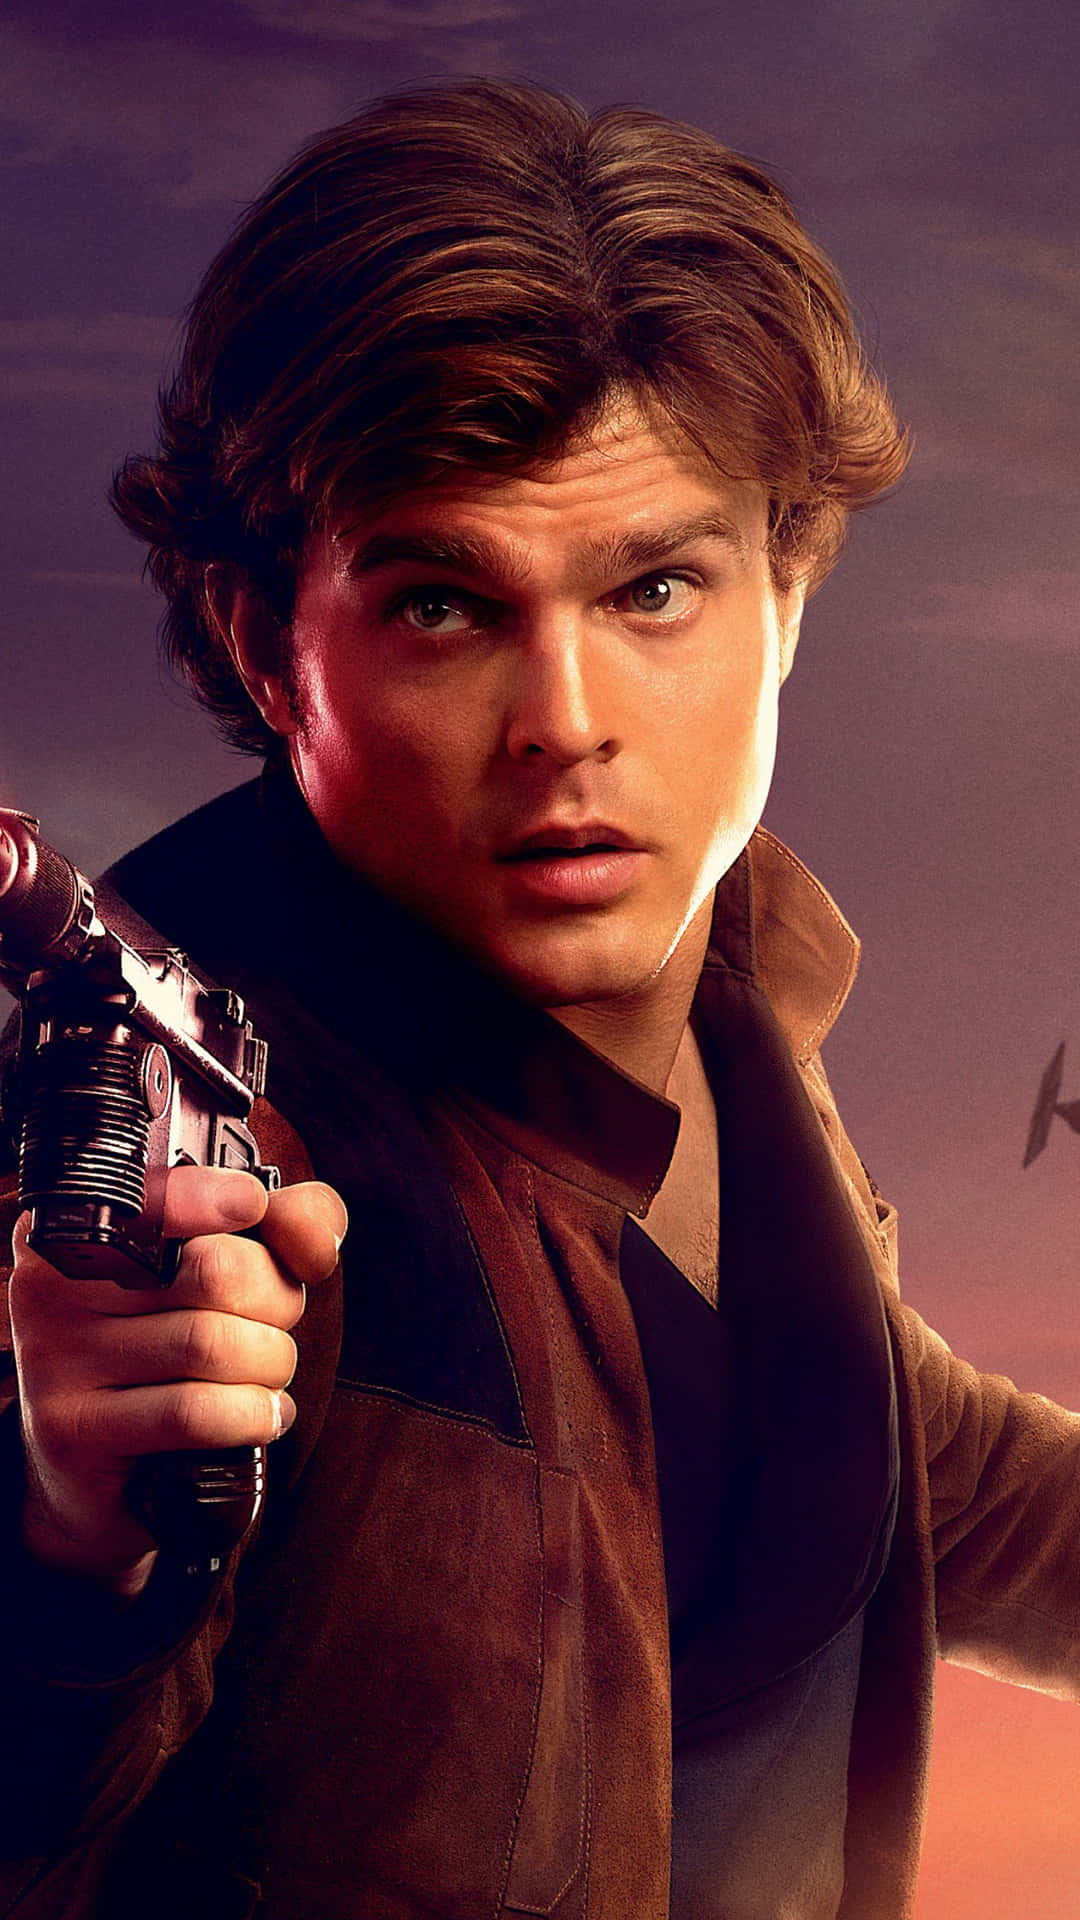 Han Solo and Chewbacca in Action Wallpaper